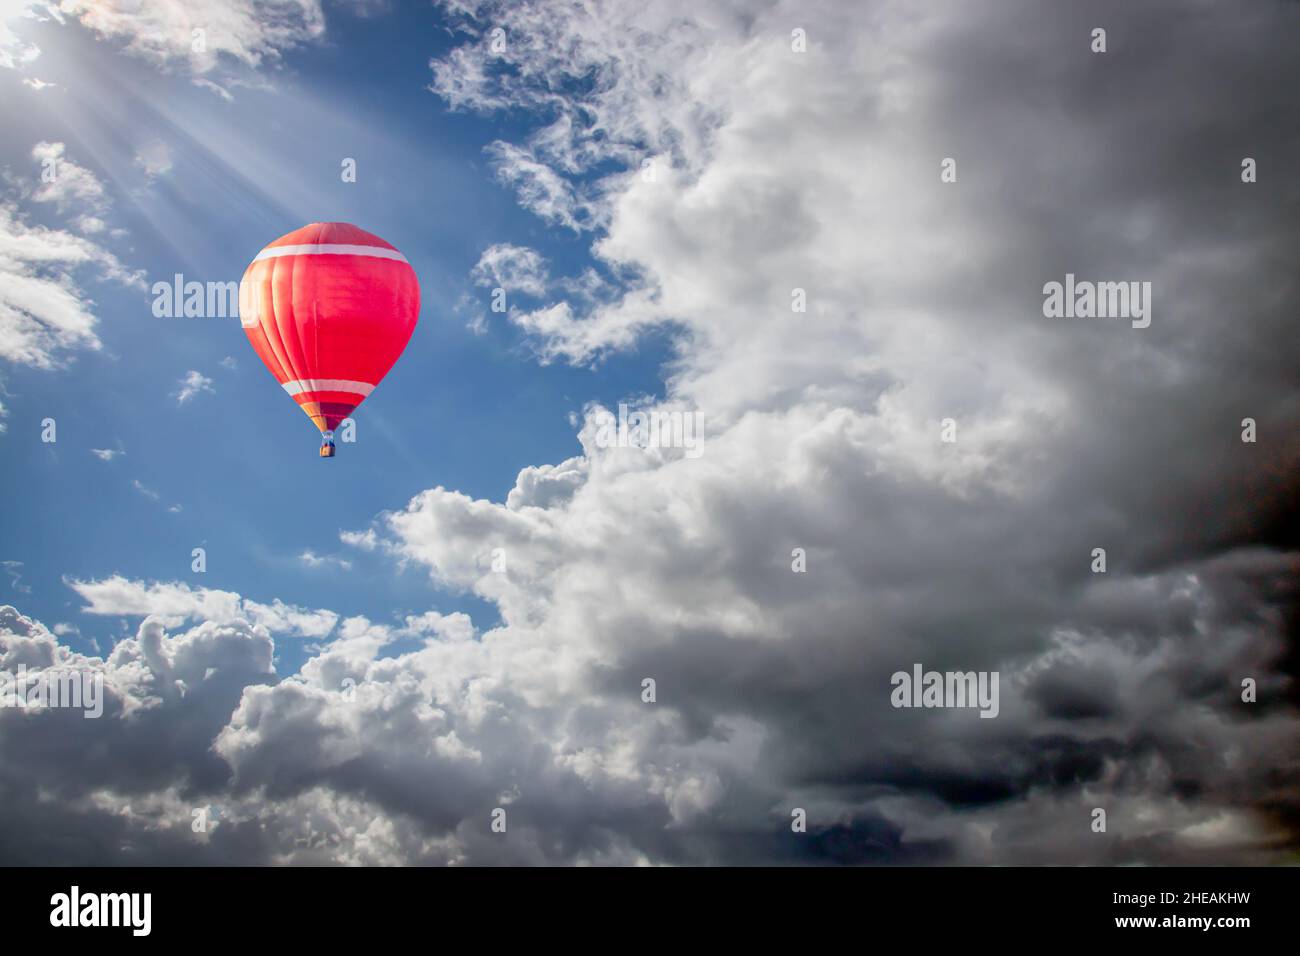 a red hot air balloon soaring into clouds of a summer storm Stock Photo